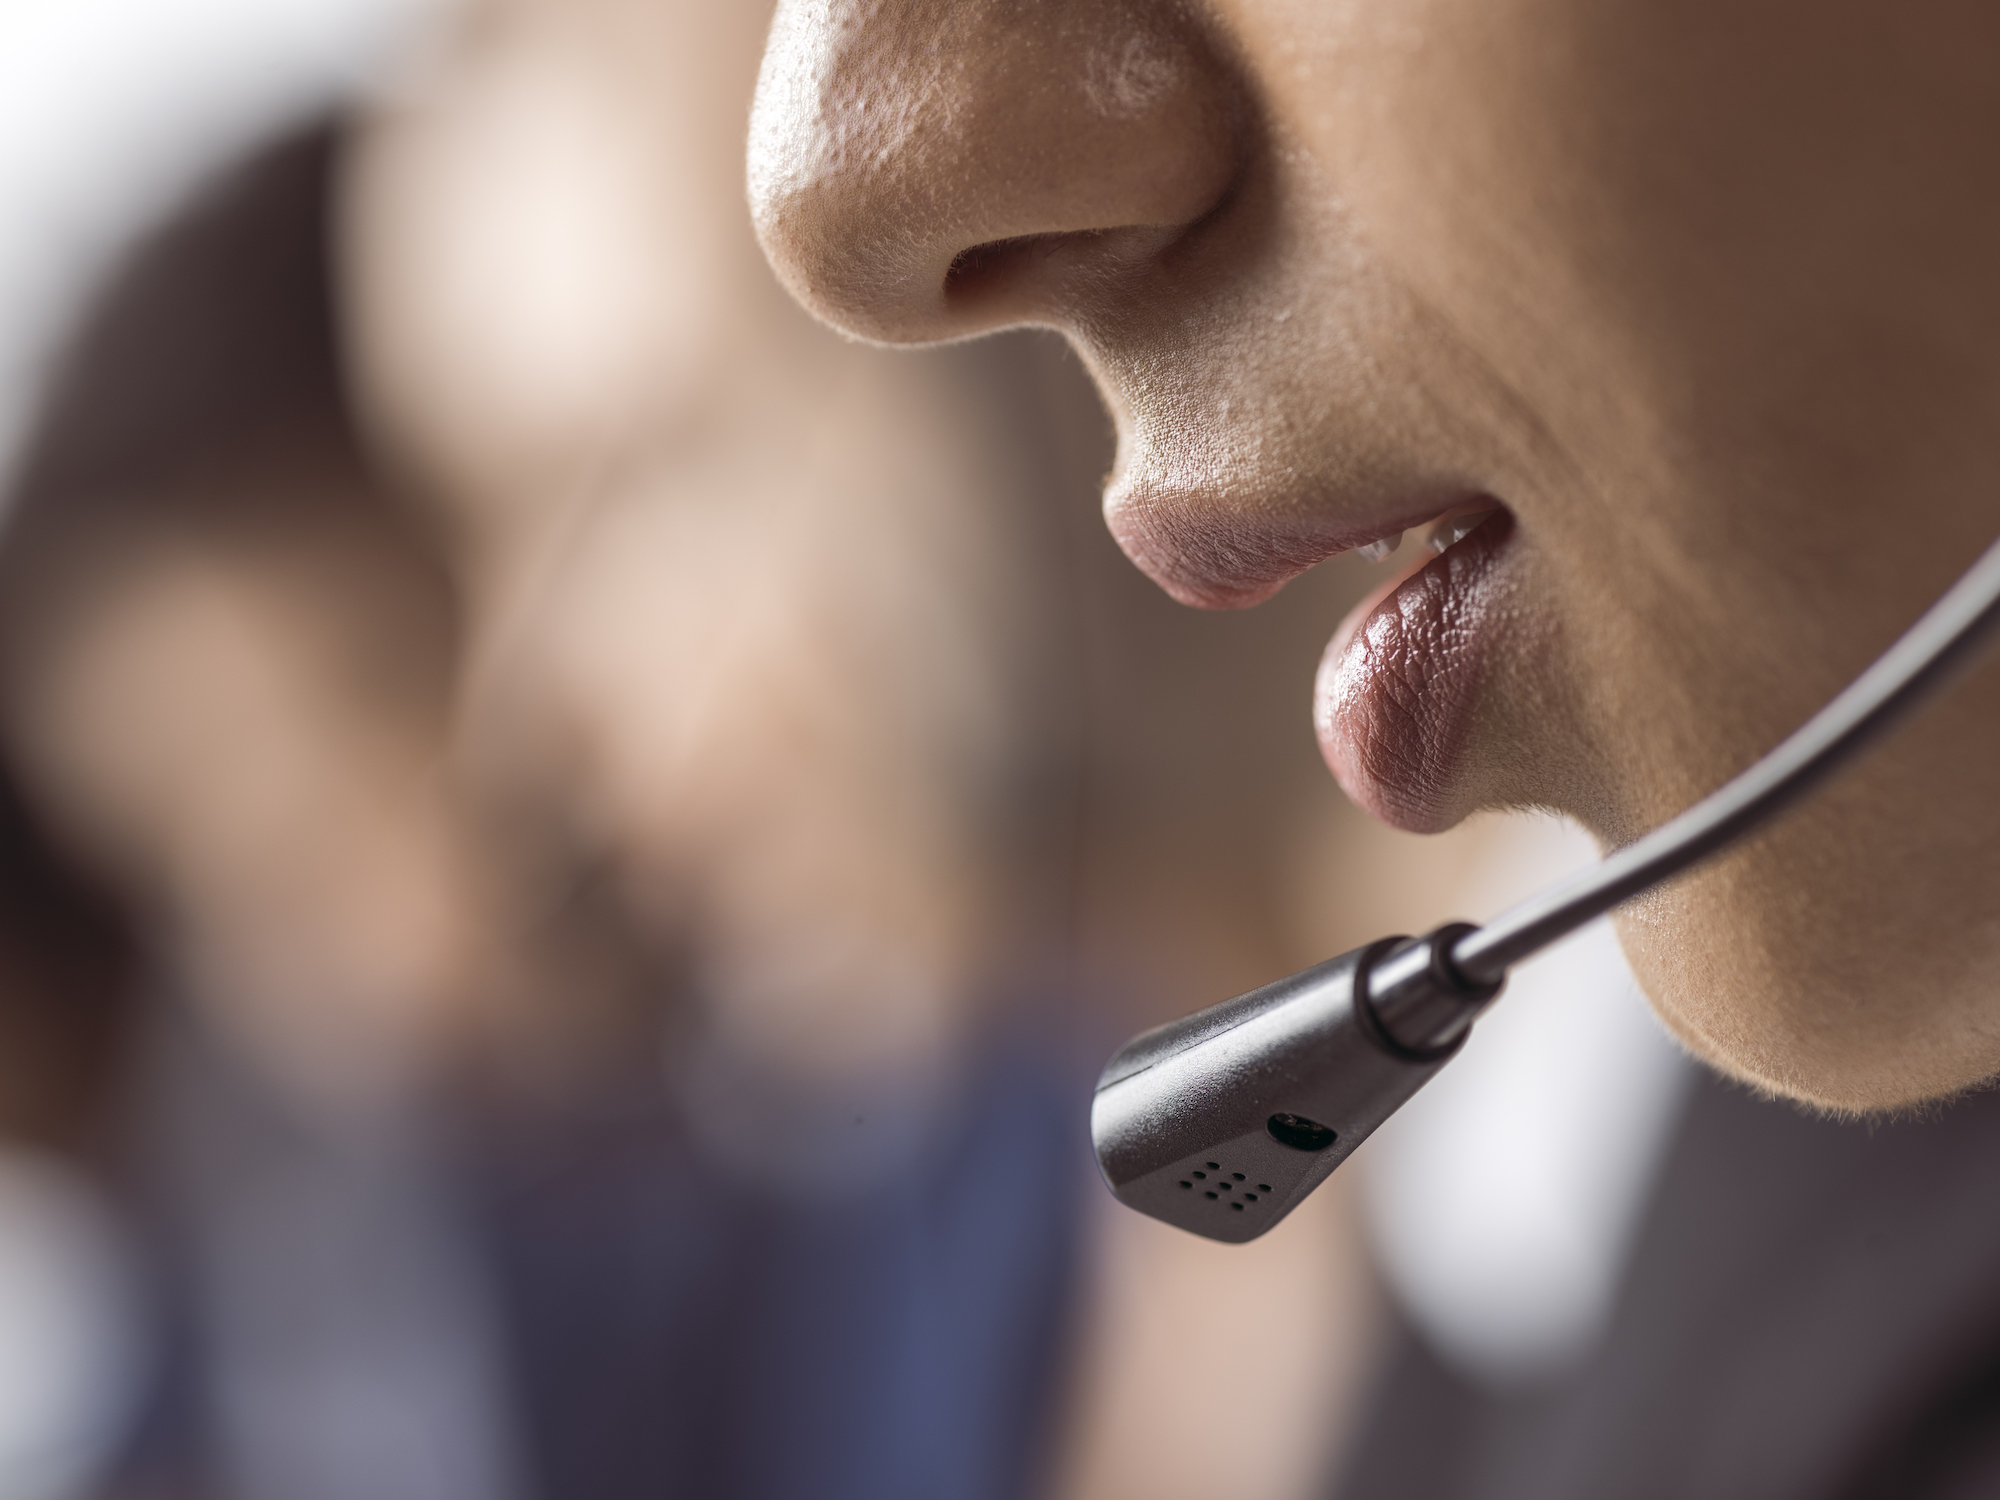 A startup is using AI to make call center workers sound ‘American’